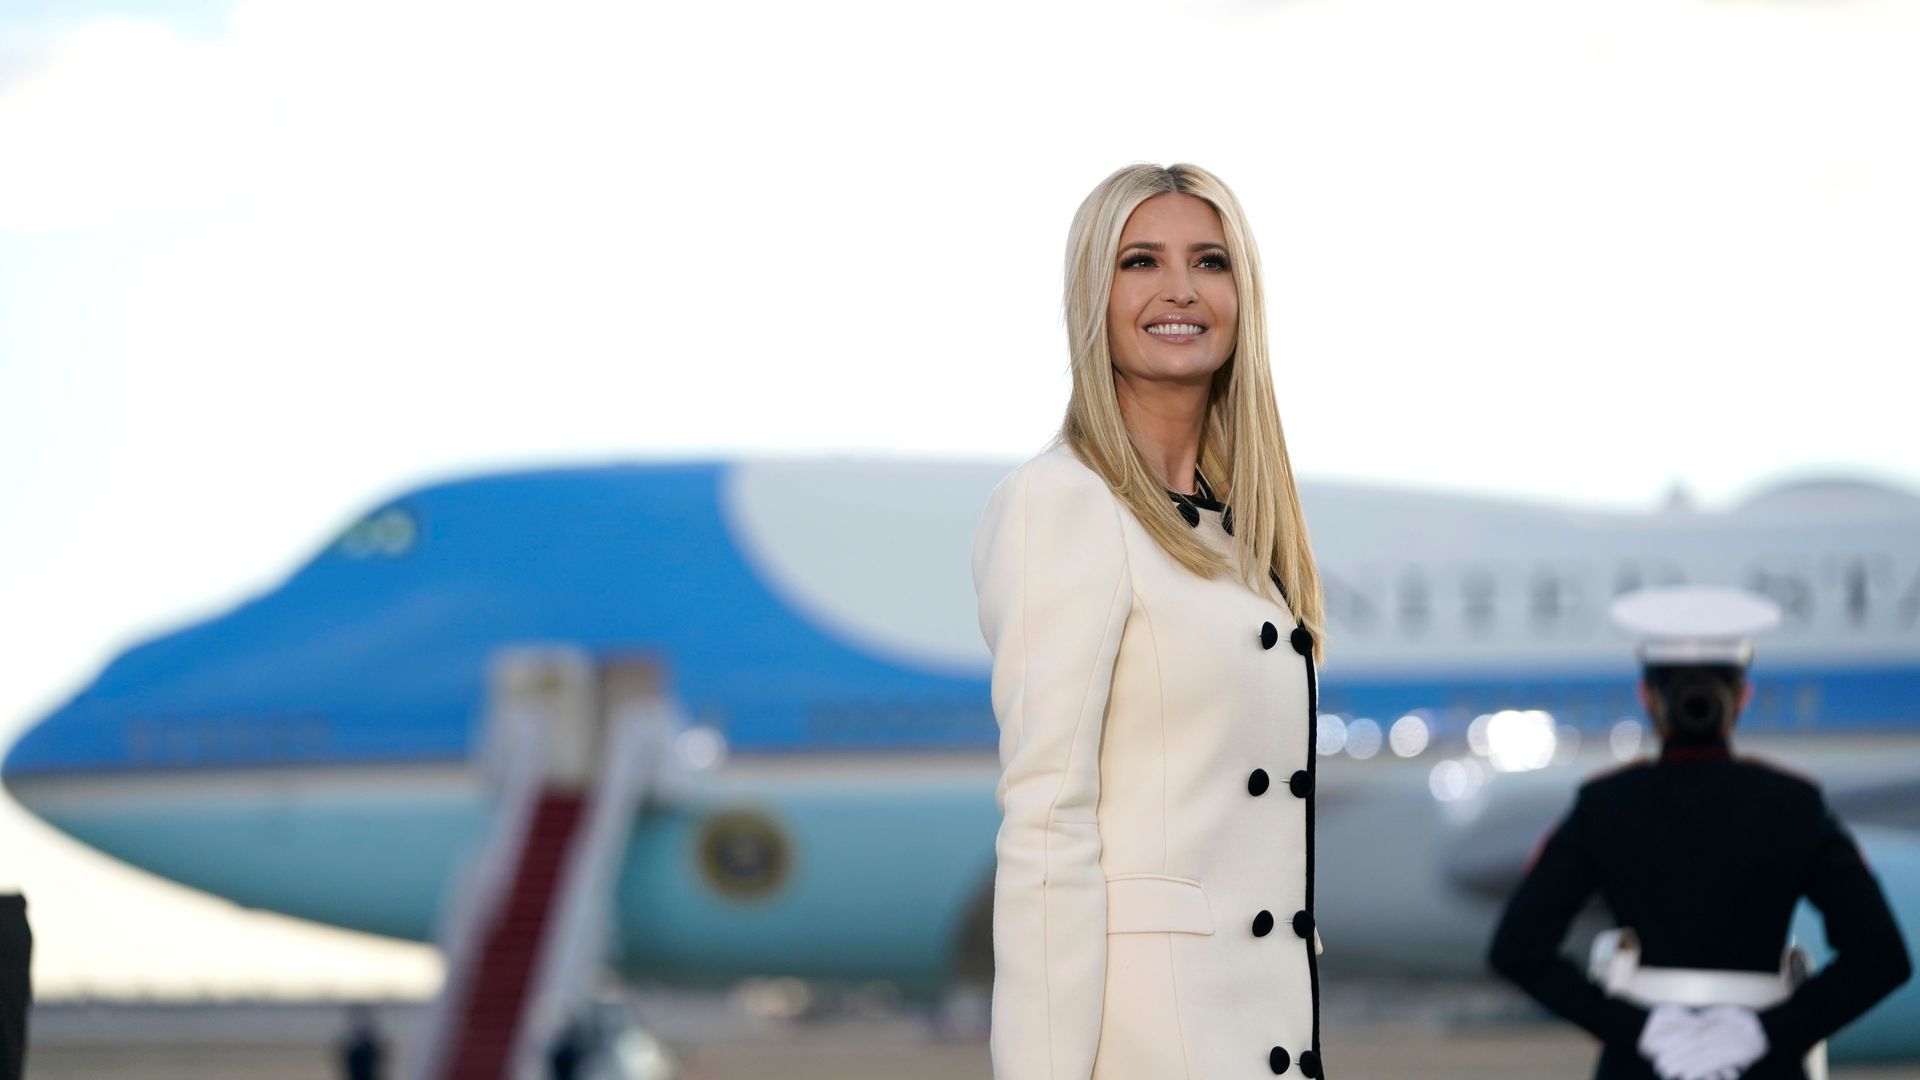 Former first daughter Ivanka Trump is seen standing against the backdrop of Air Force One.